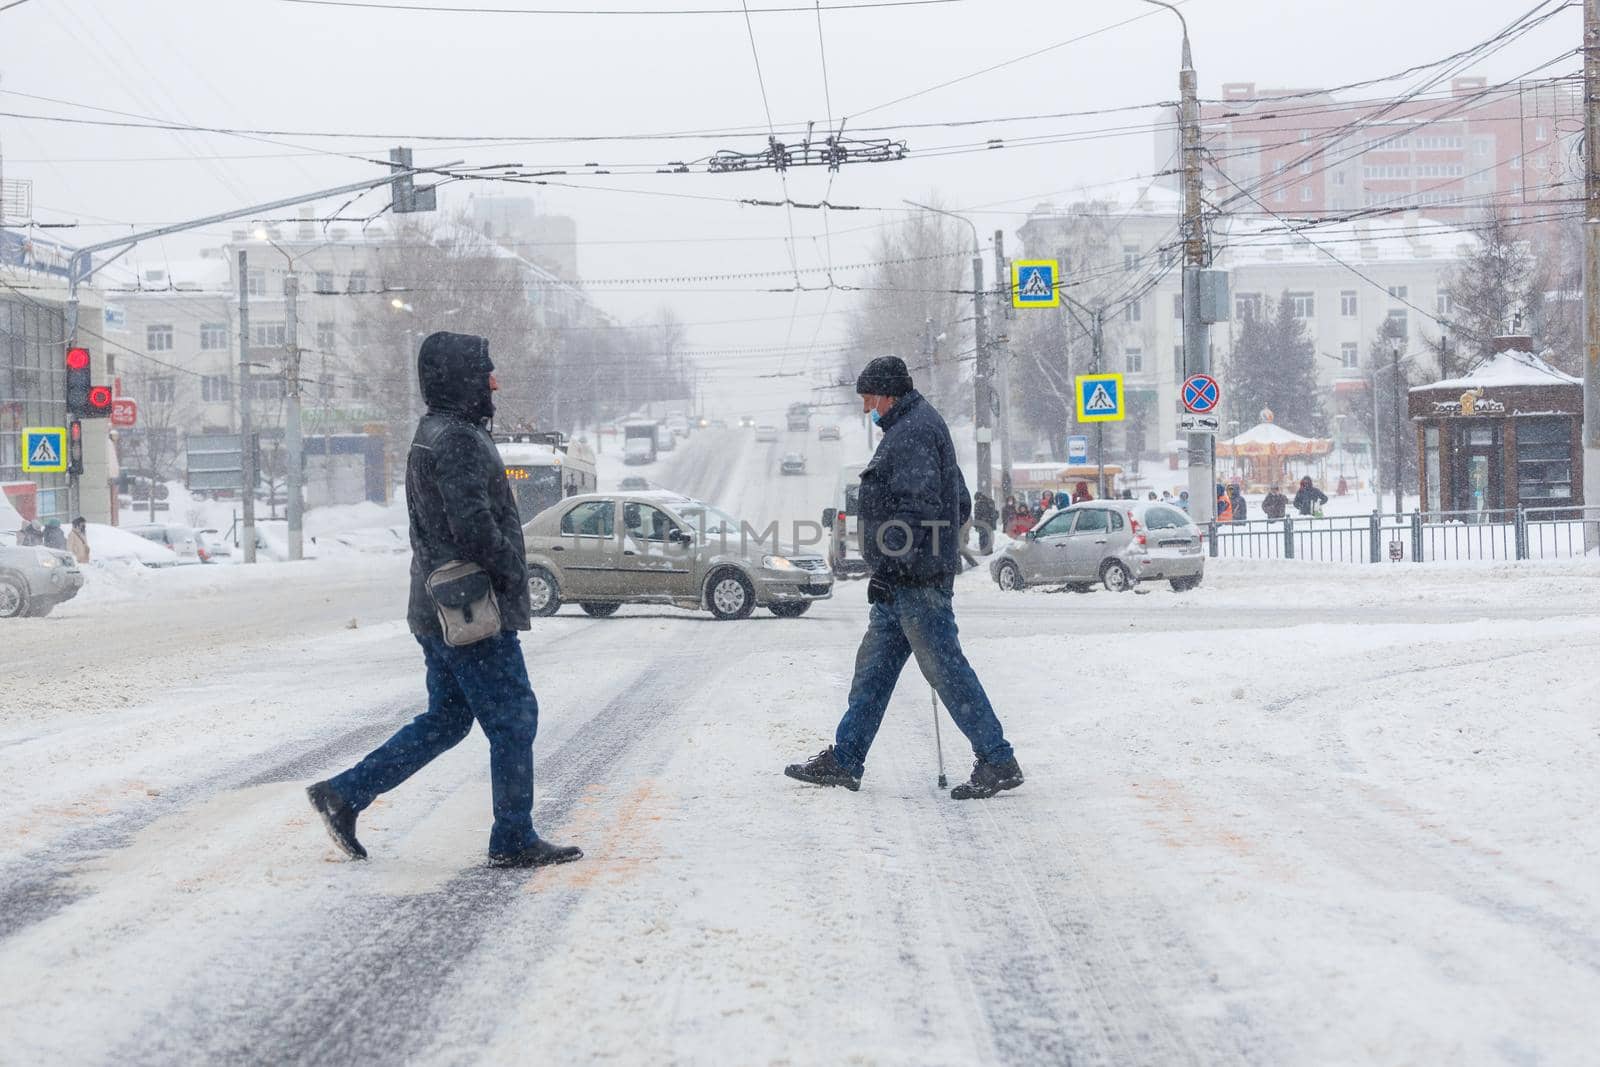 Tula, Russia - February 13, 2020: Two men crossing city road during heavy snow fall. by z1b